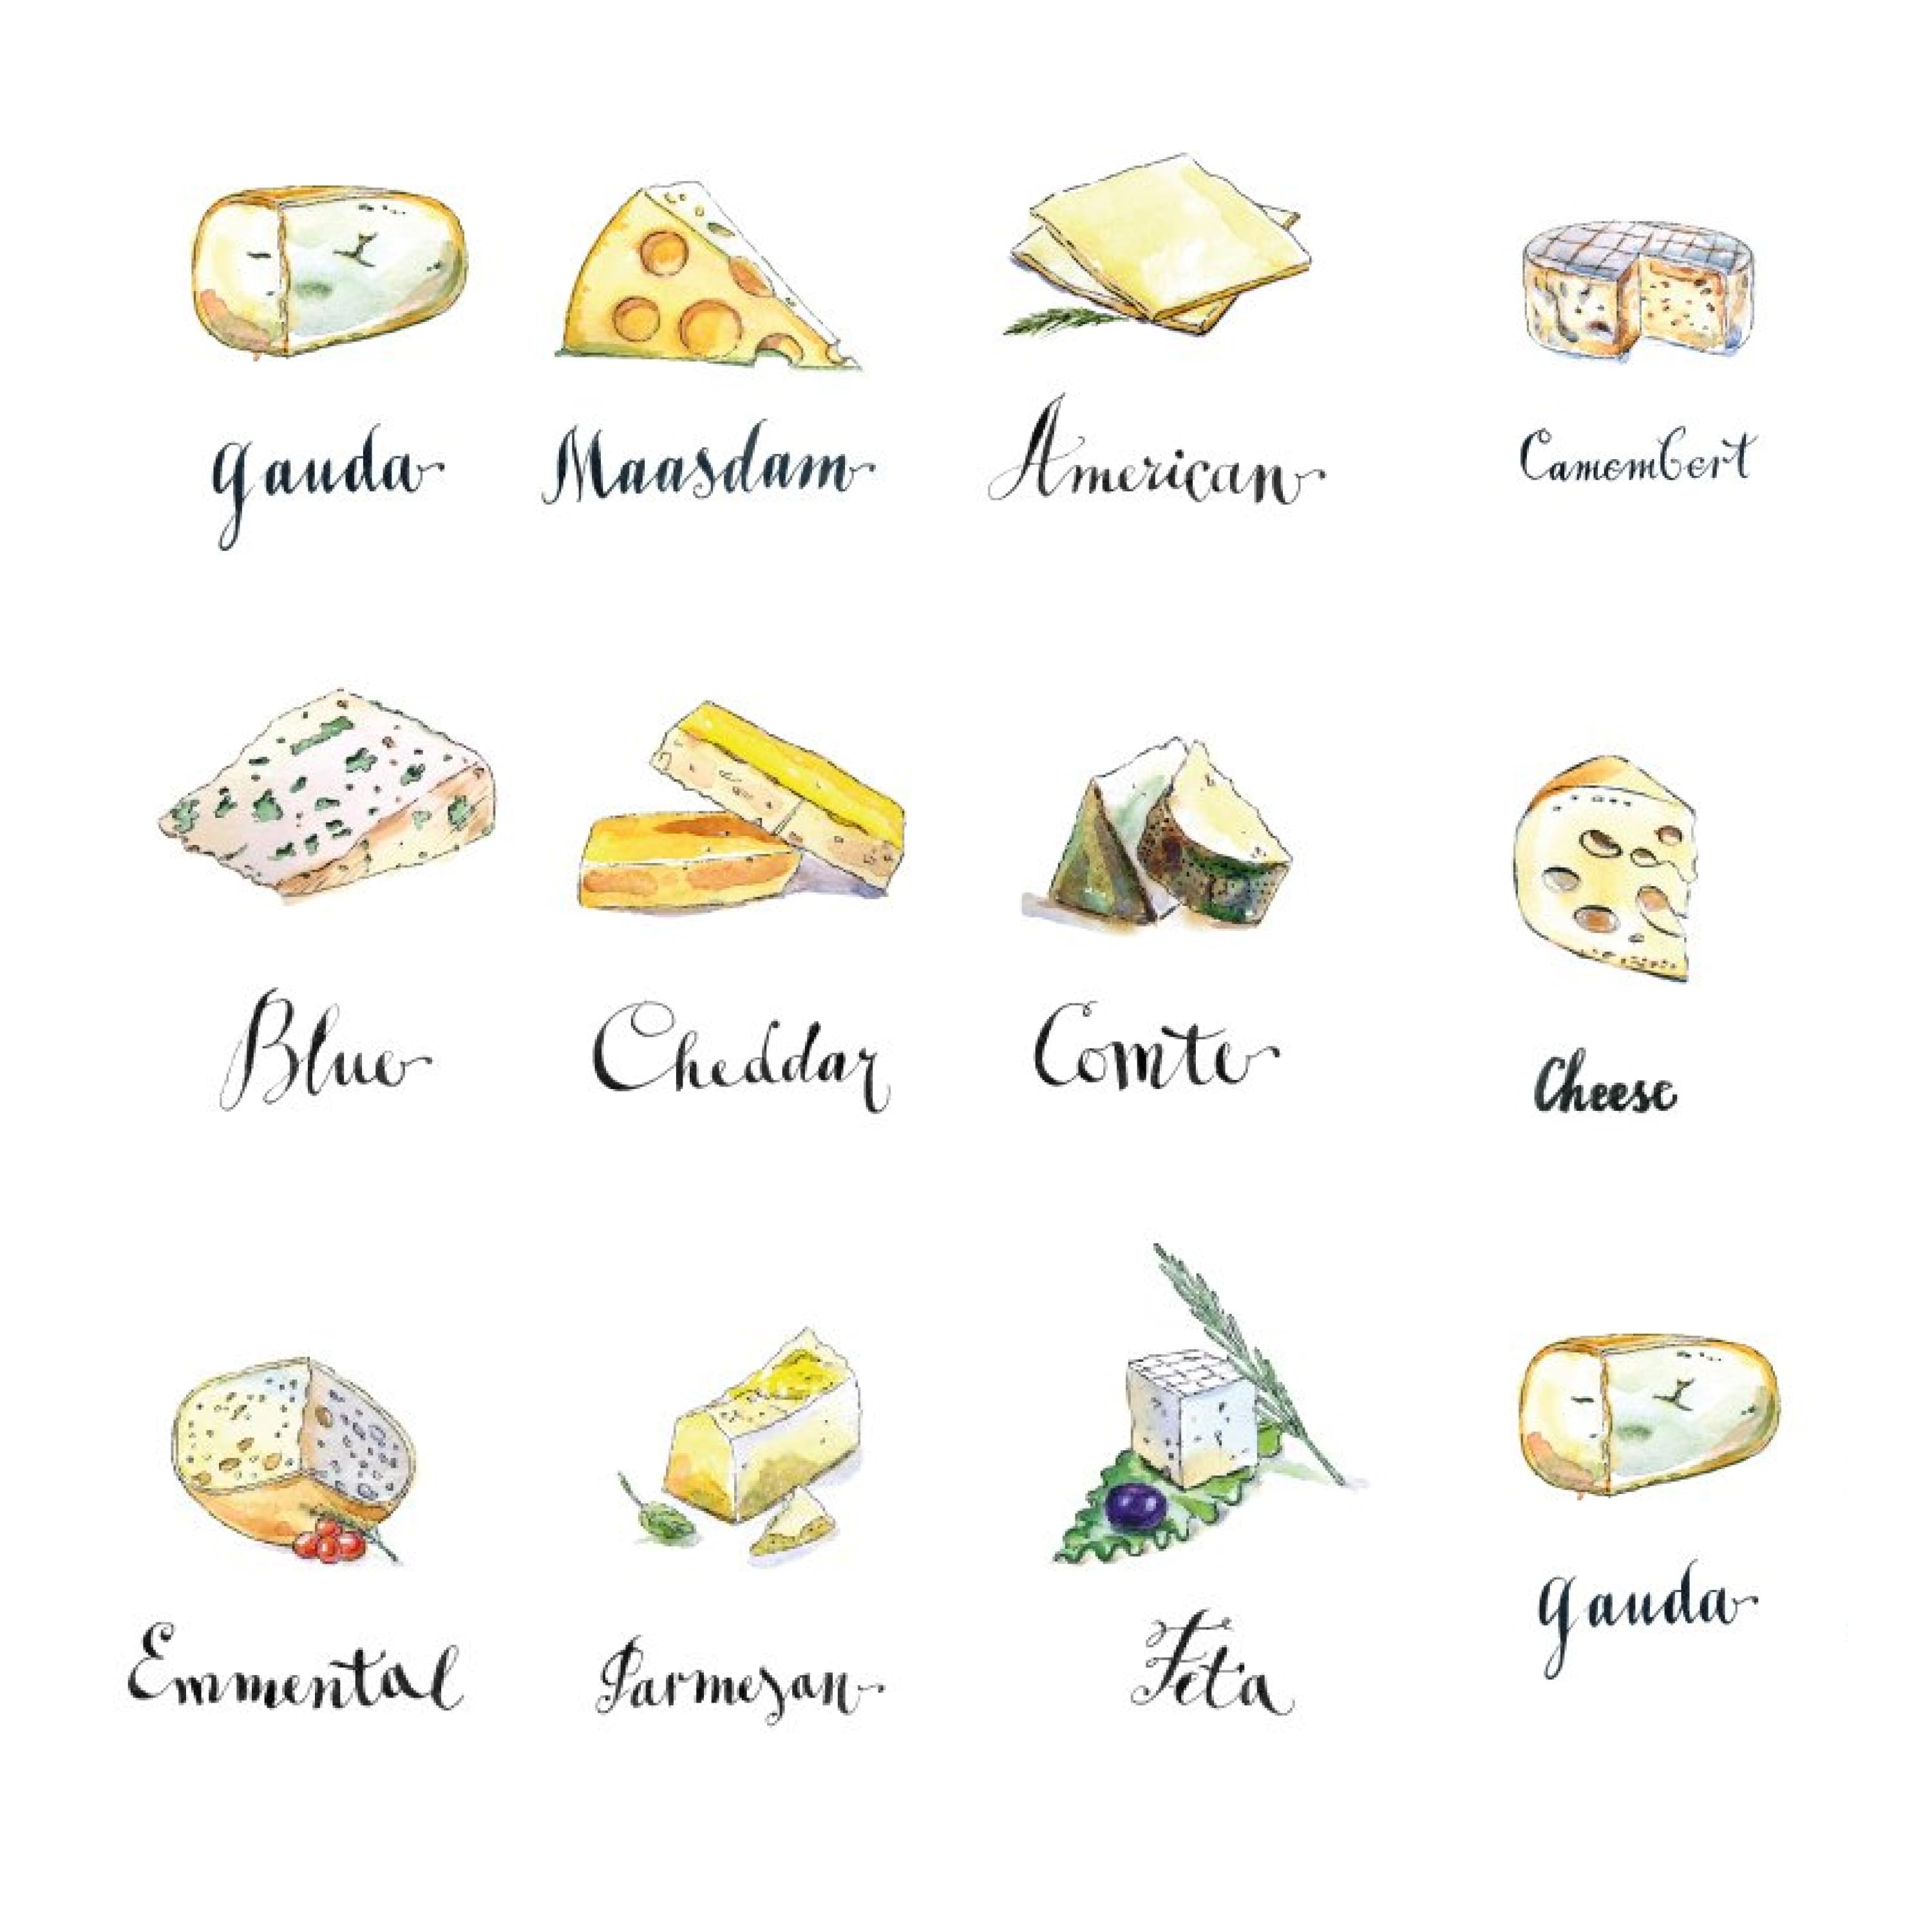 Cartoon image of different types of cheeses drawn by watercolors.